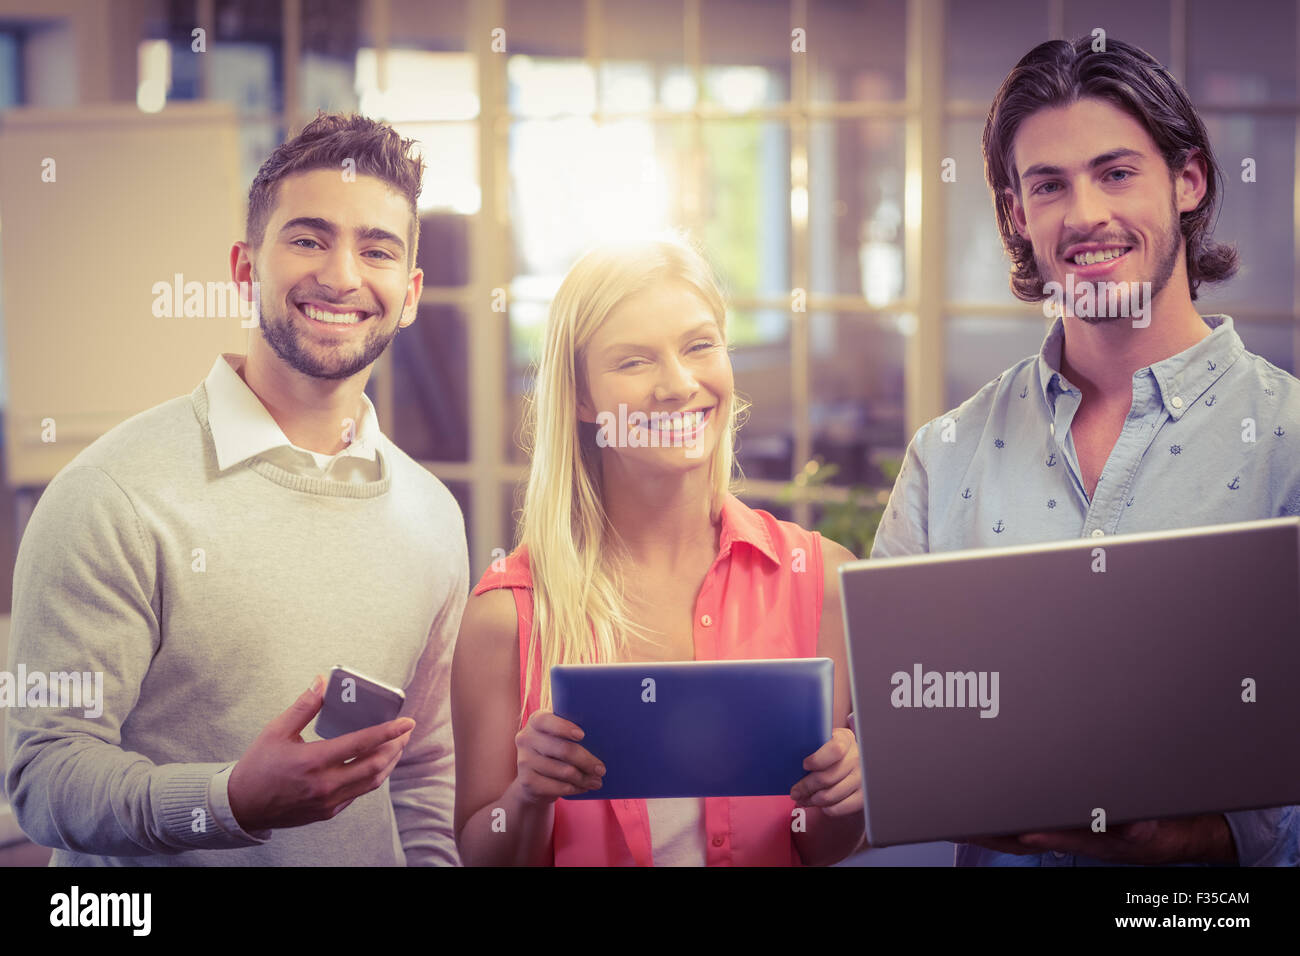 Confident business people working with the help of technologies Stock Photo